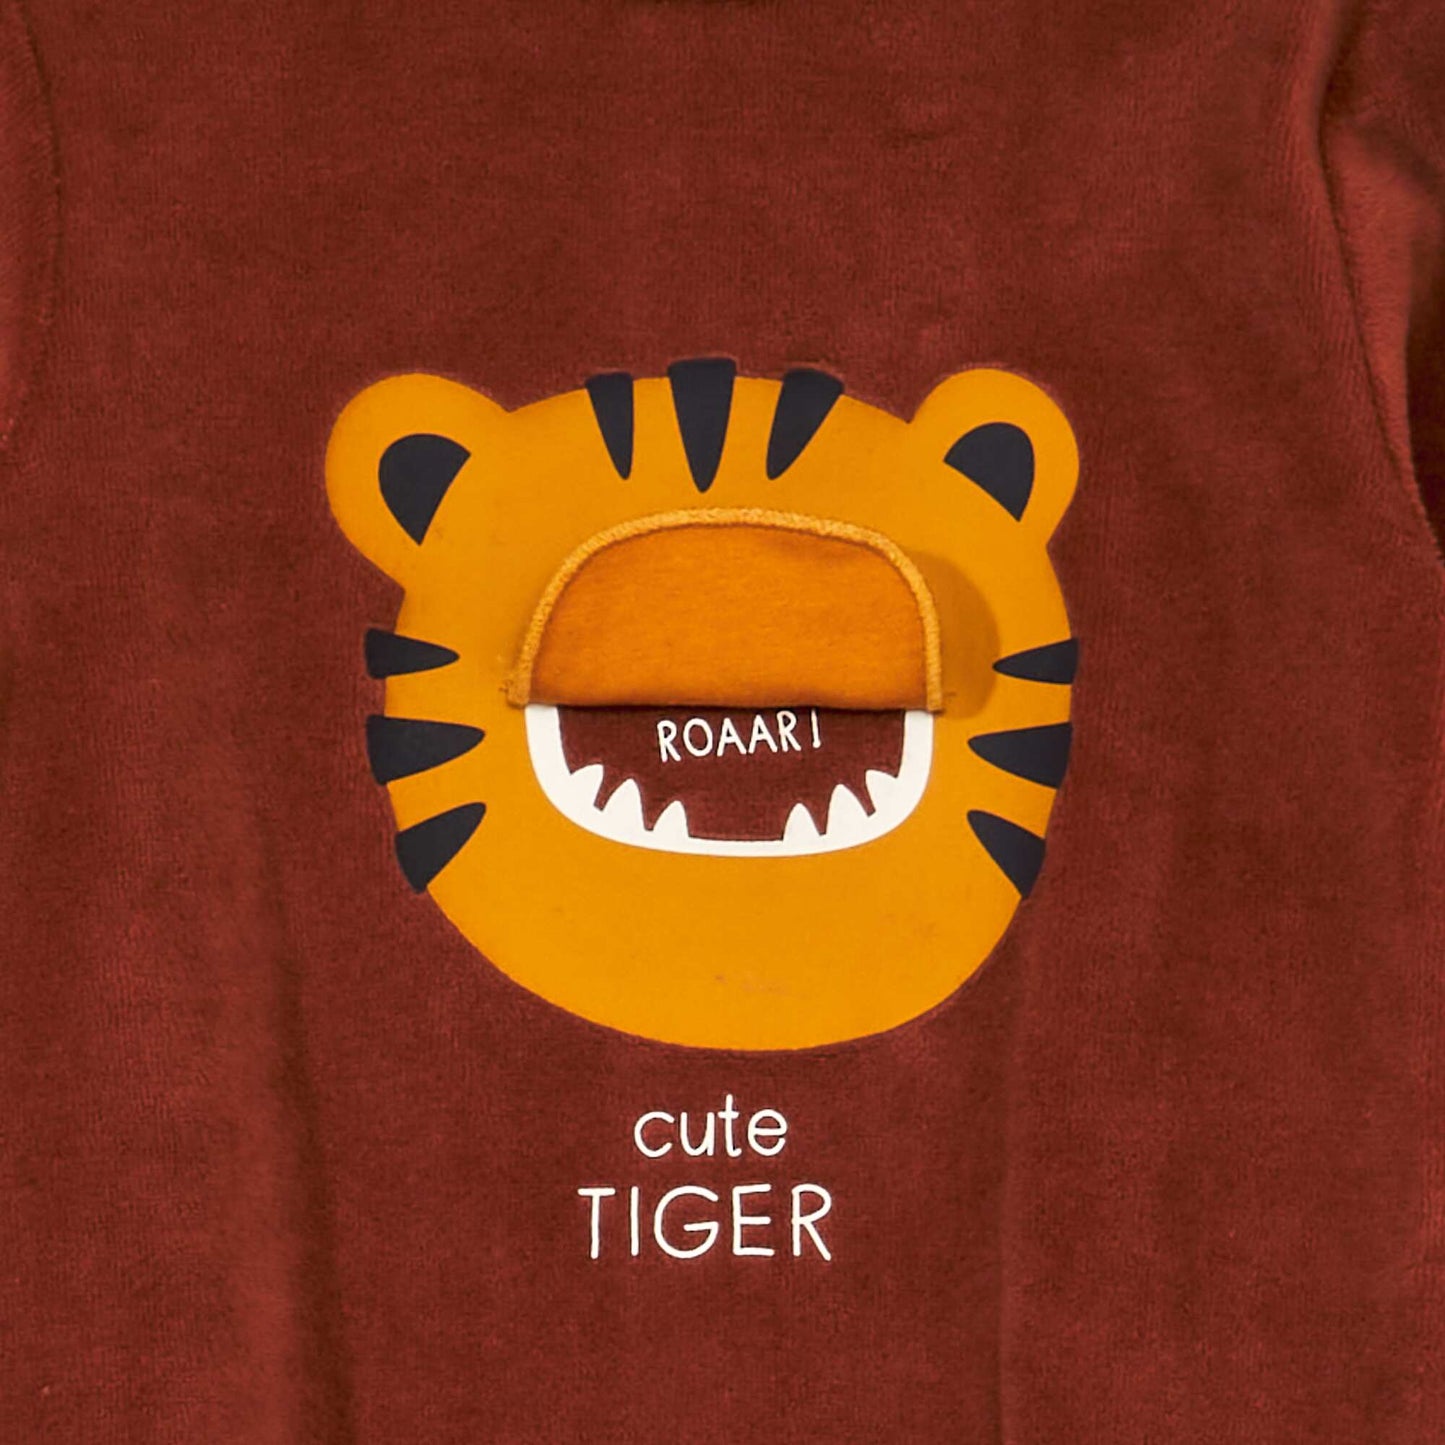 Velour sleepsuit RED_TIGER